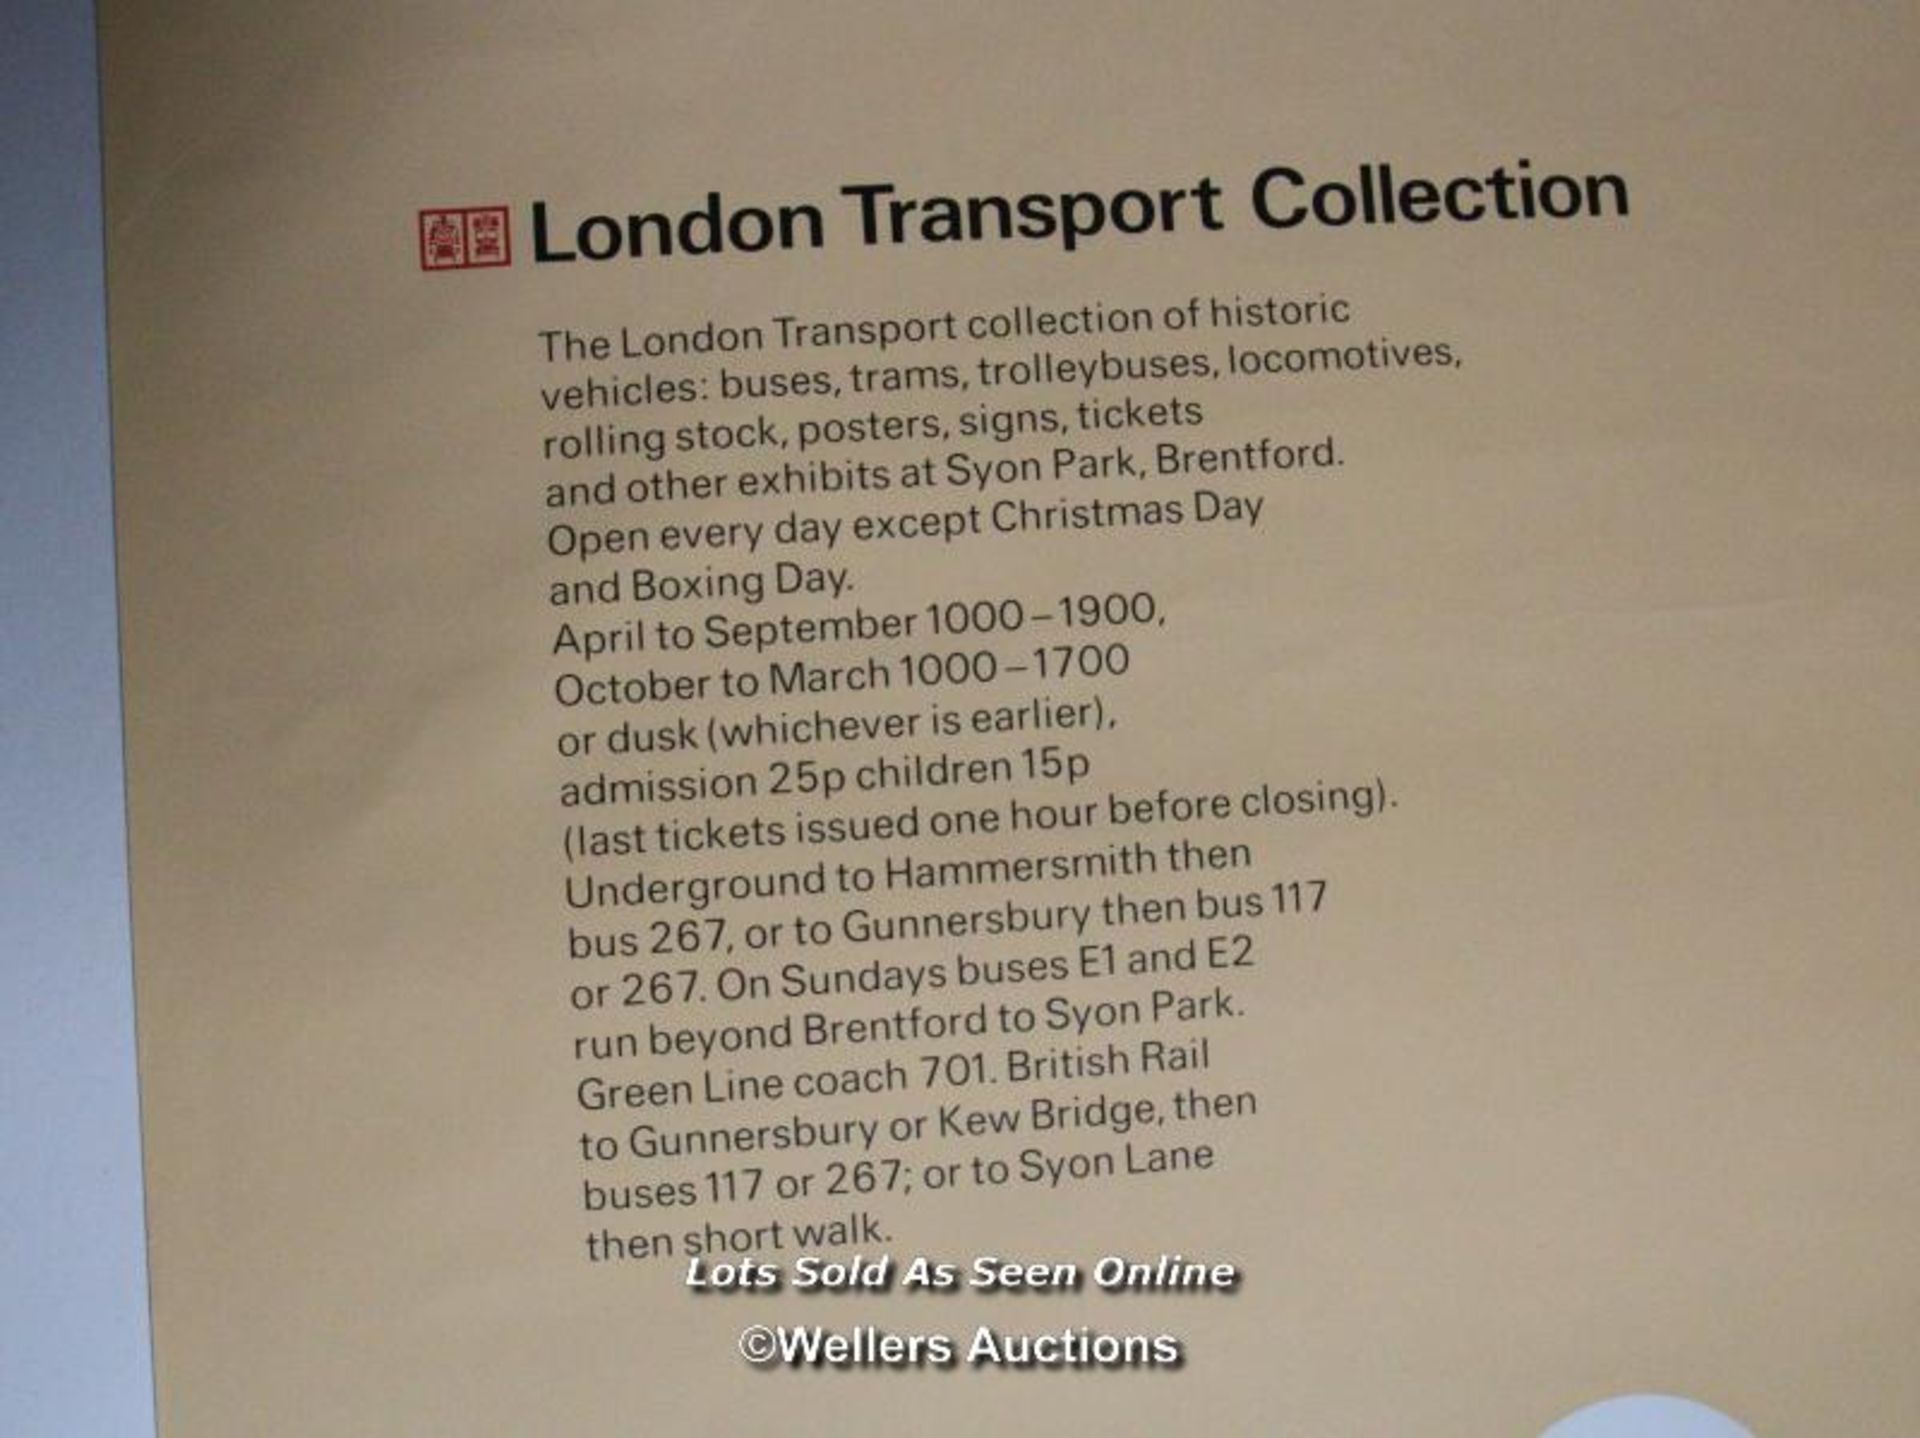 Original London Transport poster by Tom Eckersley, 1975 - Image 2 of 4